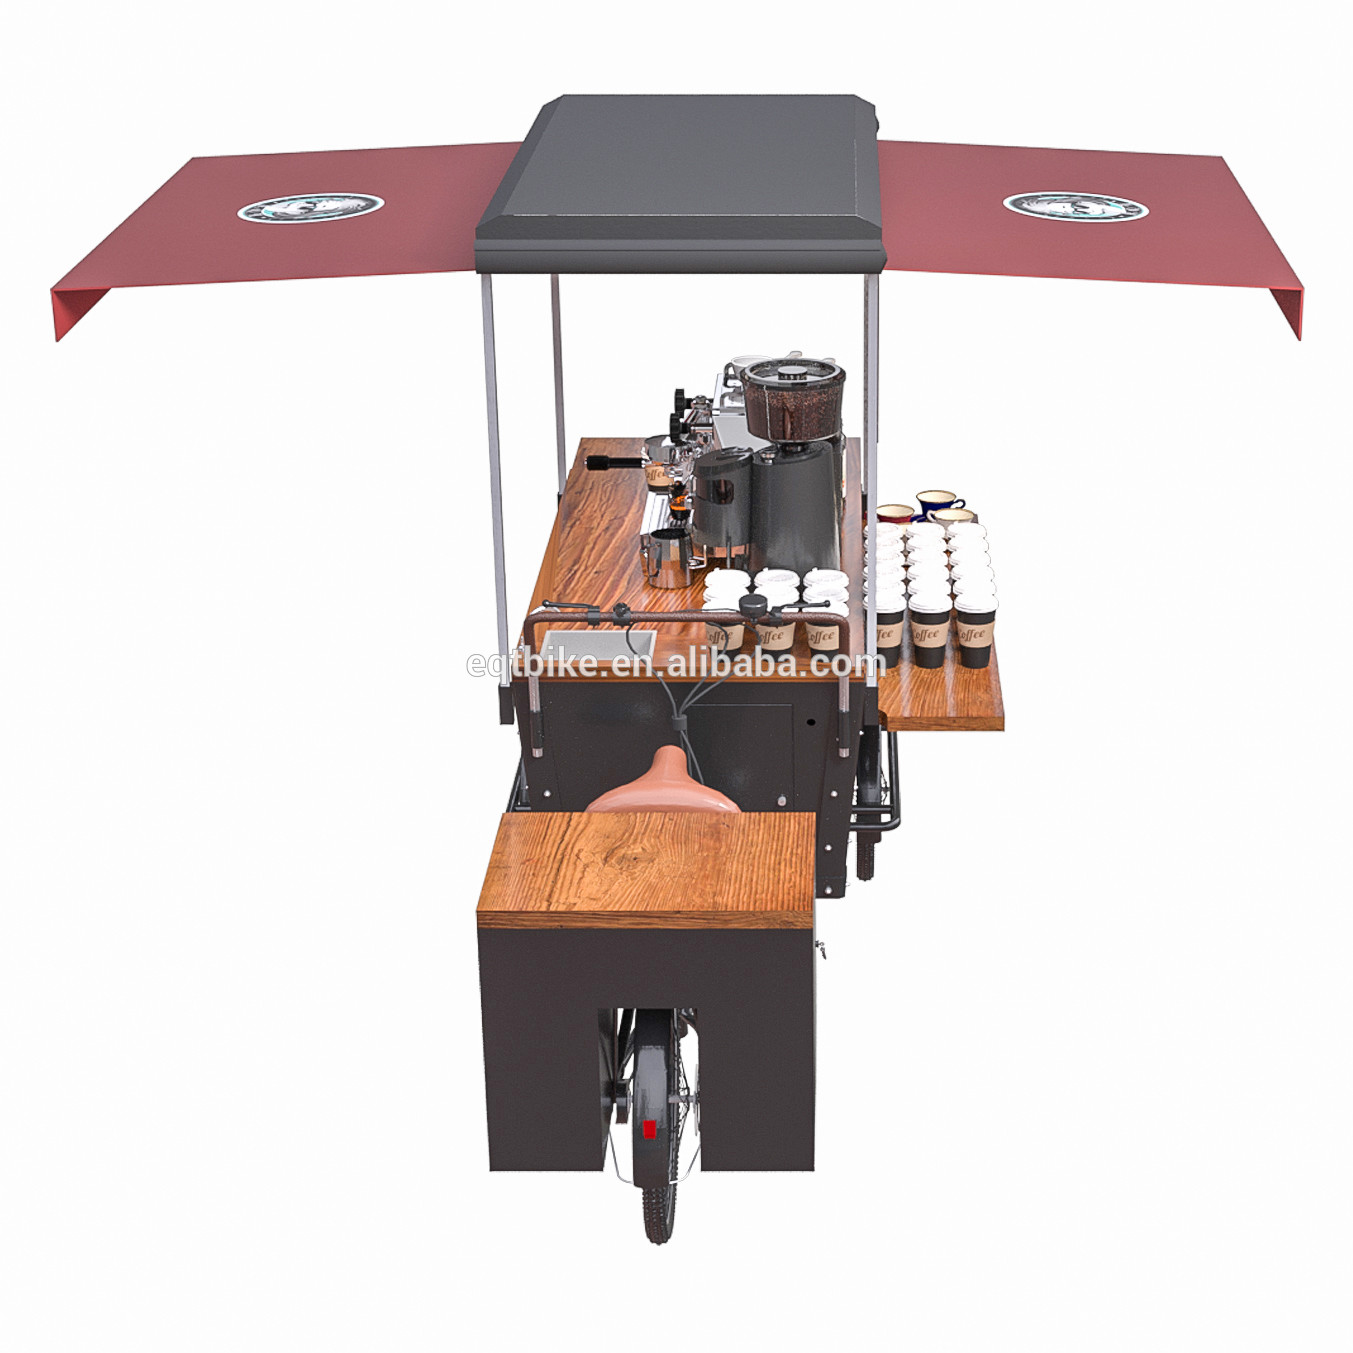 Anti Oil Box Structure Wood Tricycle Coffee Vending Cart